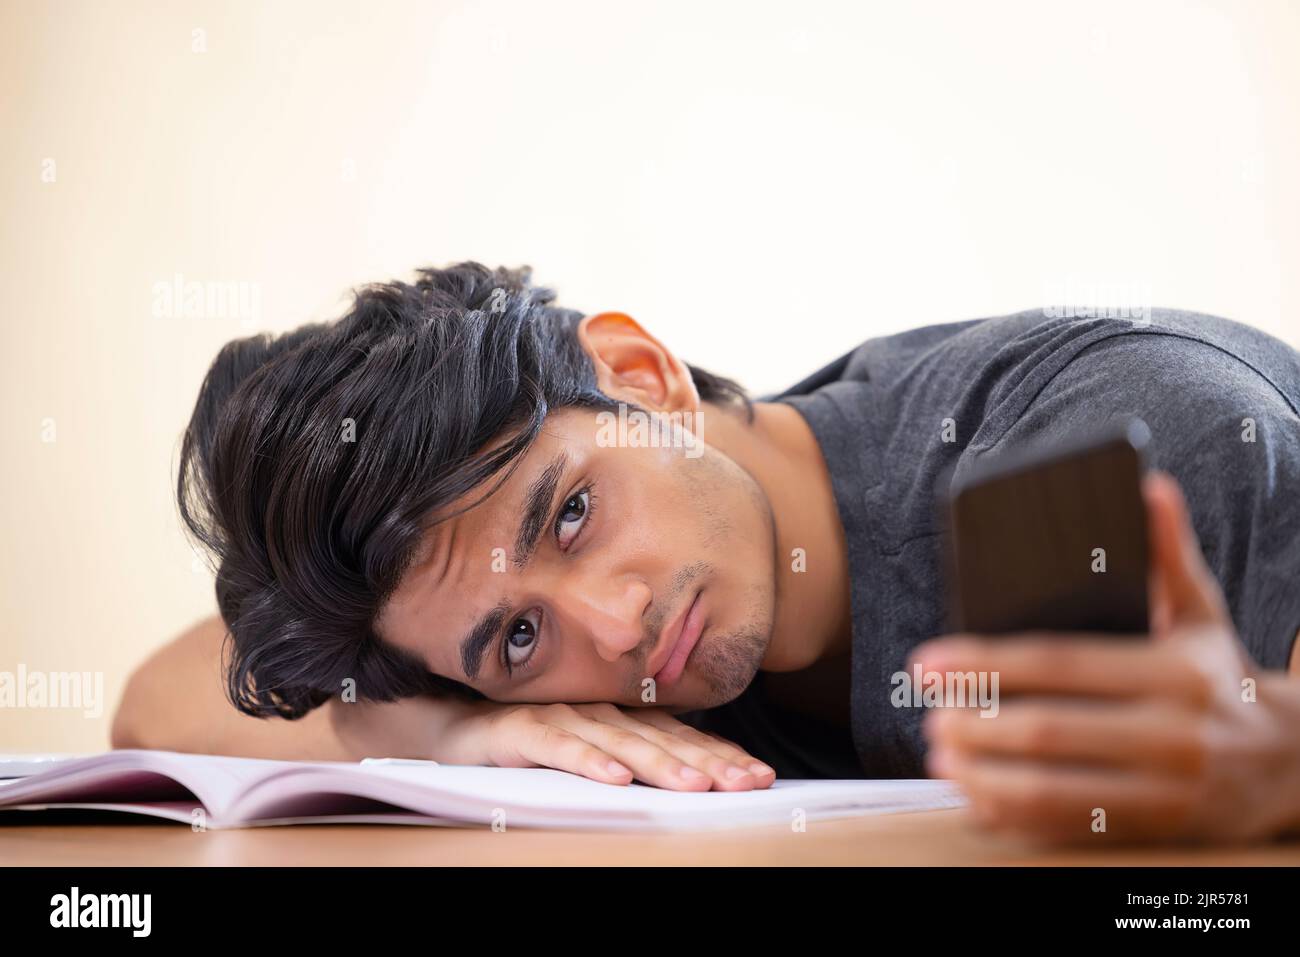 Close-up portrait of a tired teenager leaning head on hand with holding a smartphone Stock Photo